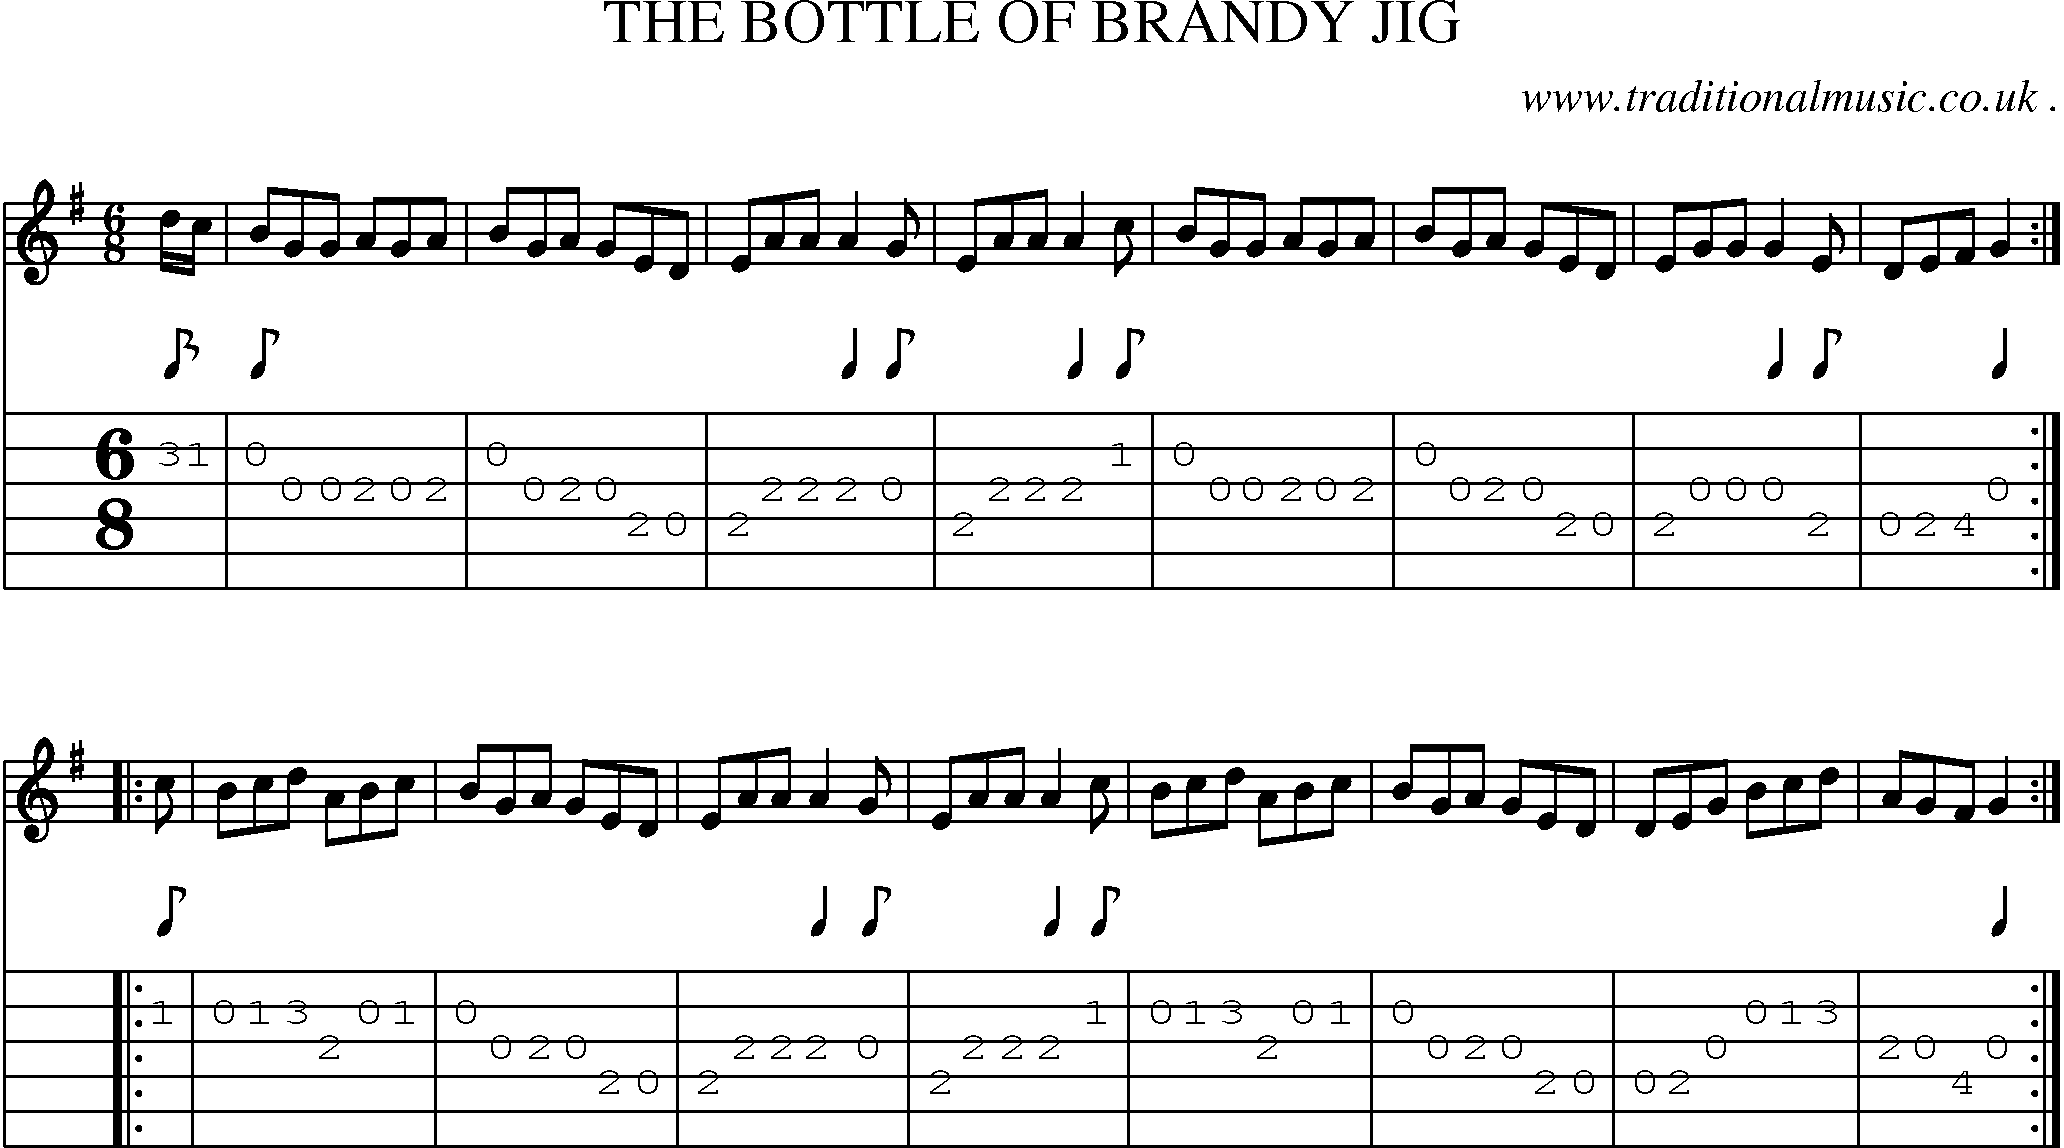 Sheet-Music and Guitar Tabs for The Bottle Of Brandy Jig